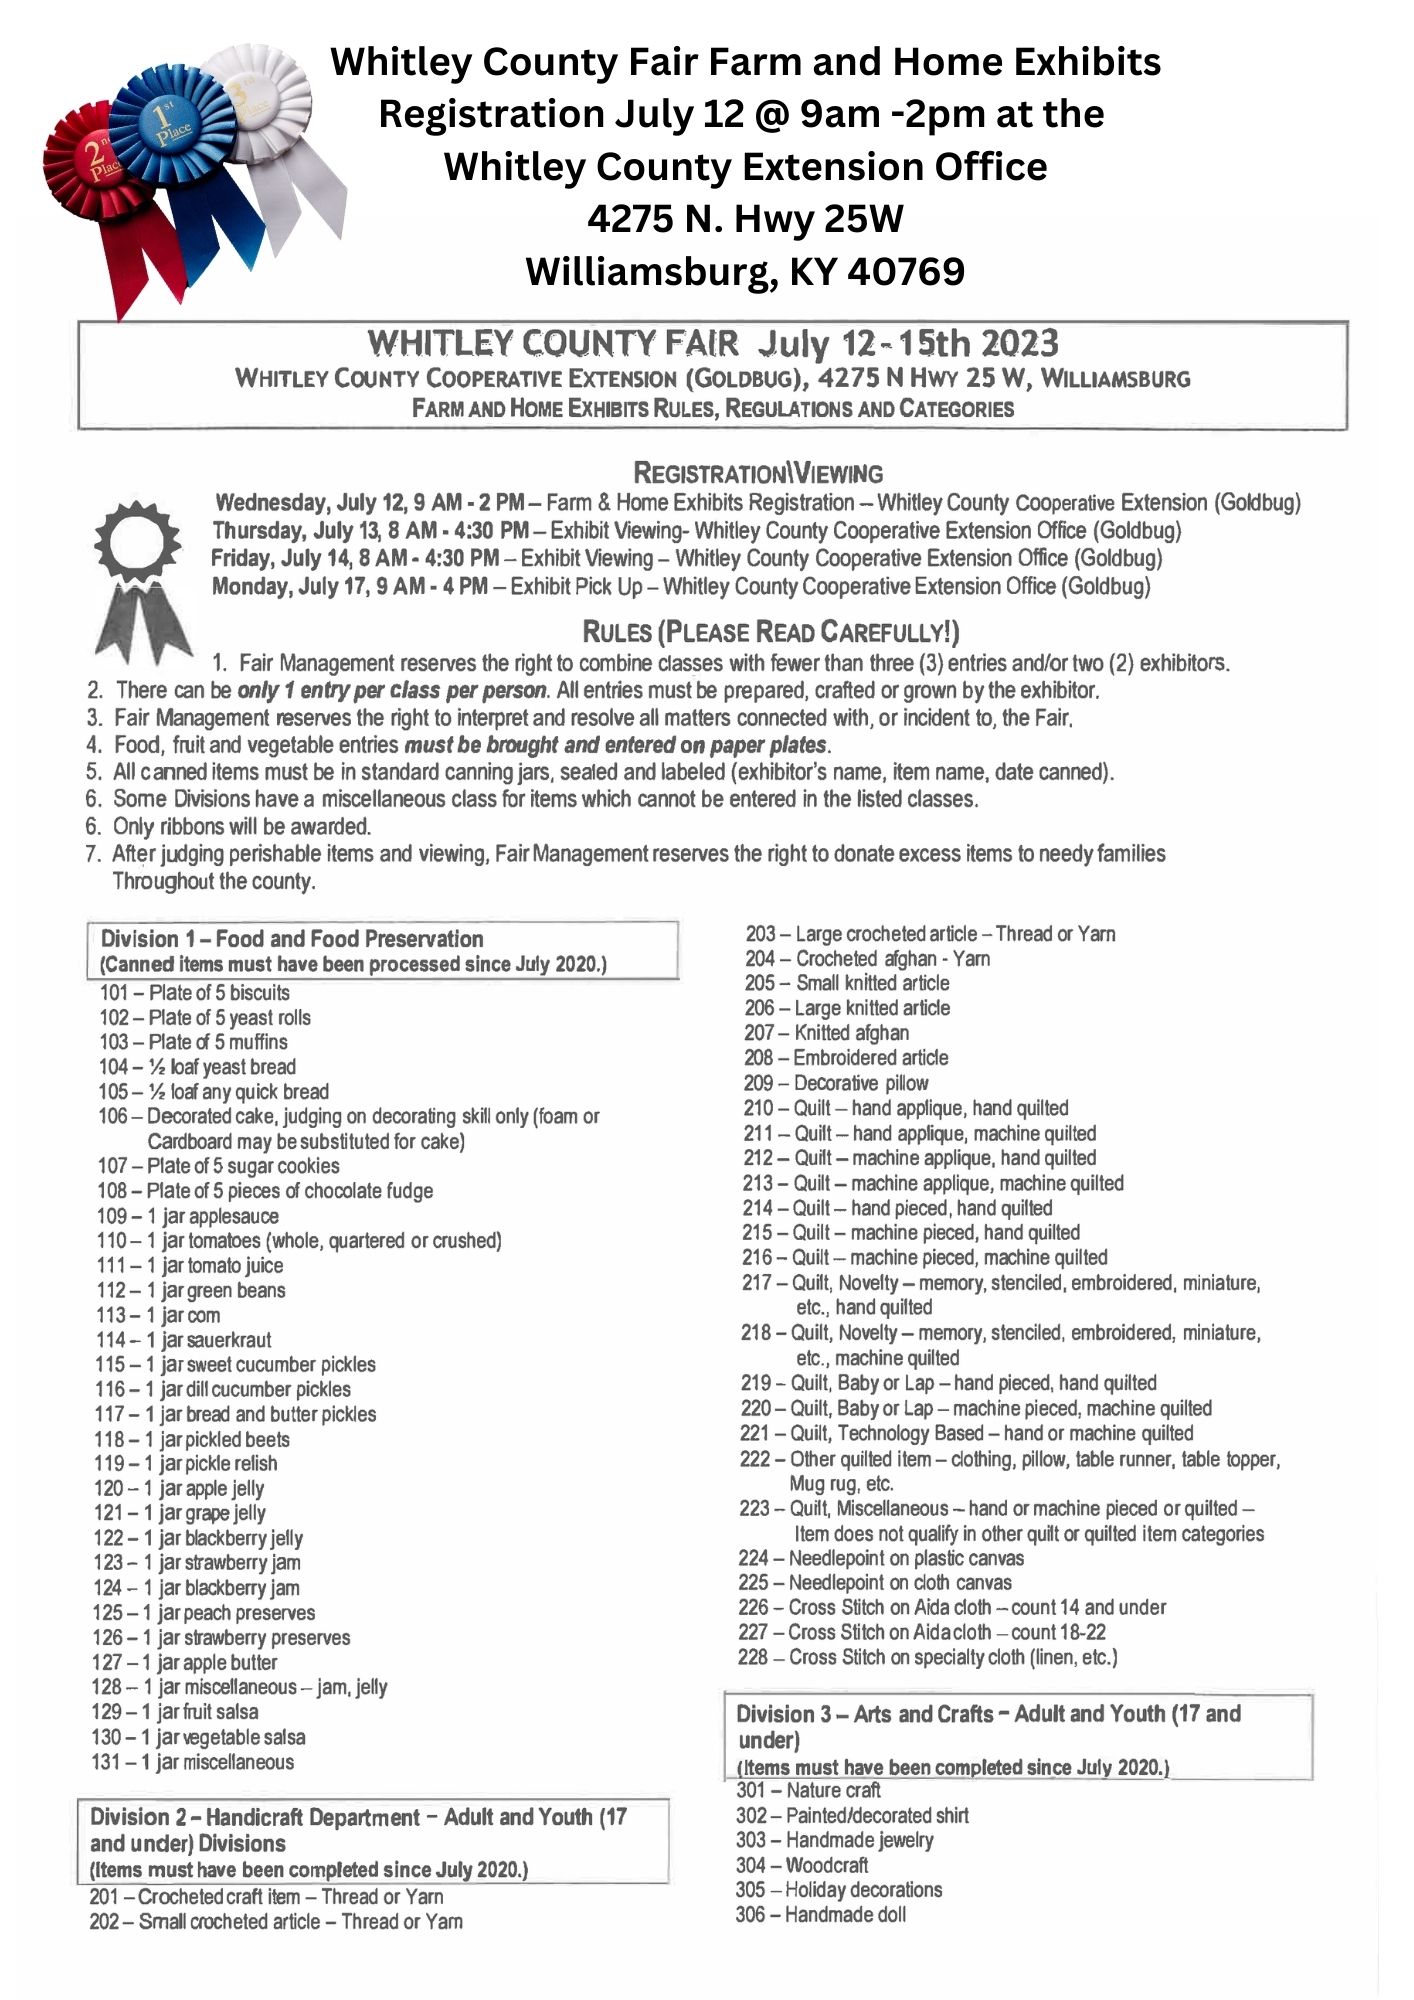 Whitley County Fair Farm and Home Exhibits Whitley County Extension